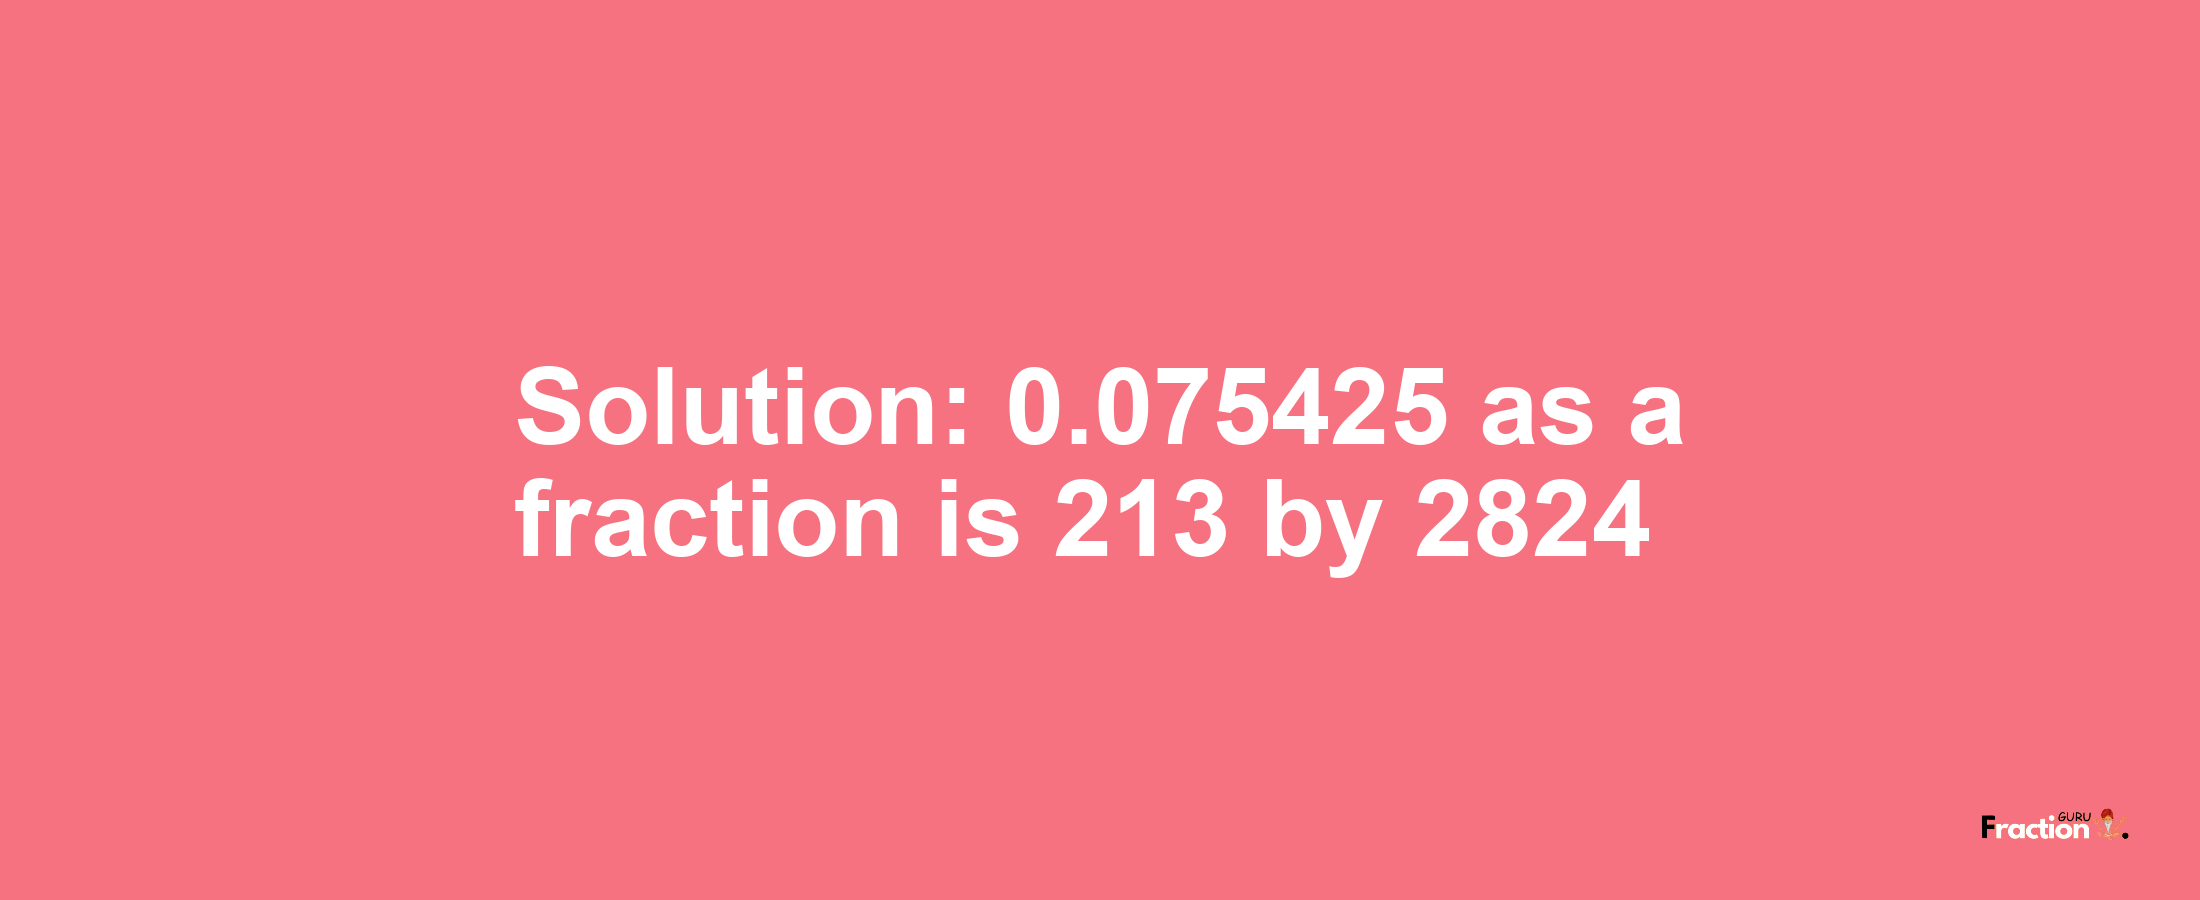 Solution:0.075425 as a fraction is 213/2824